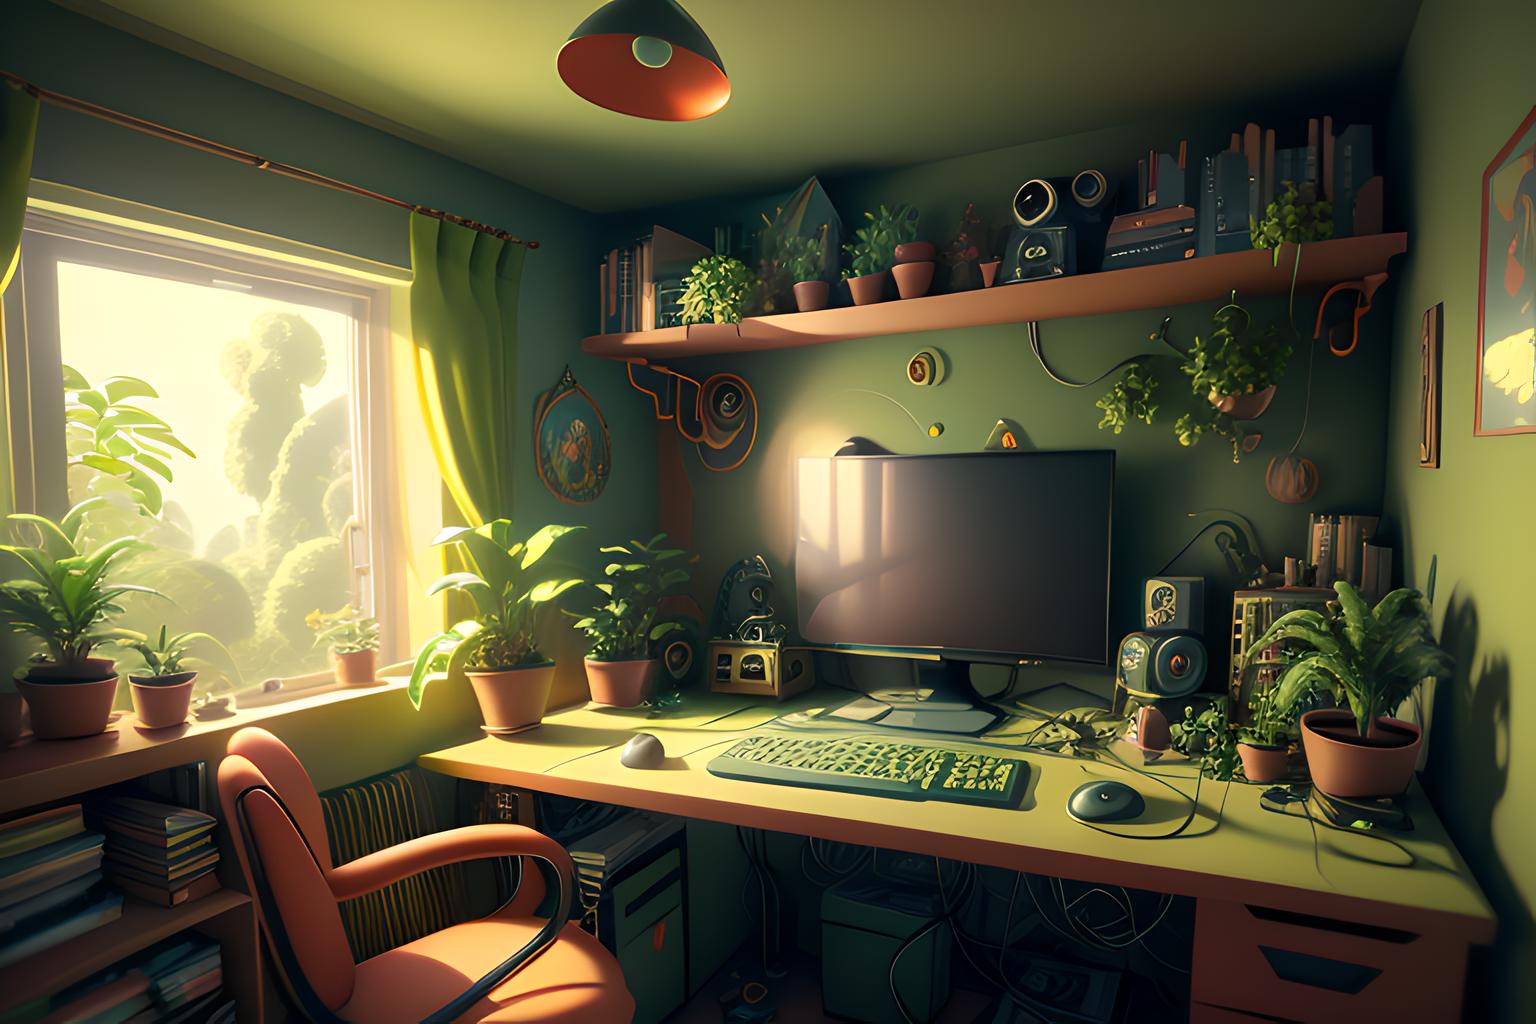 Psychedelic Rooms - [Topnotch Artstyle]  image by SharapaGorg